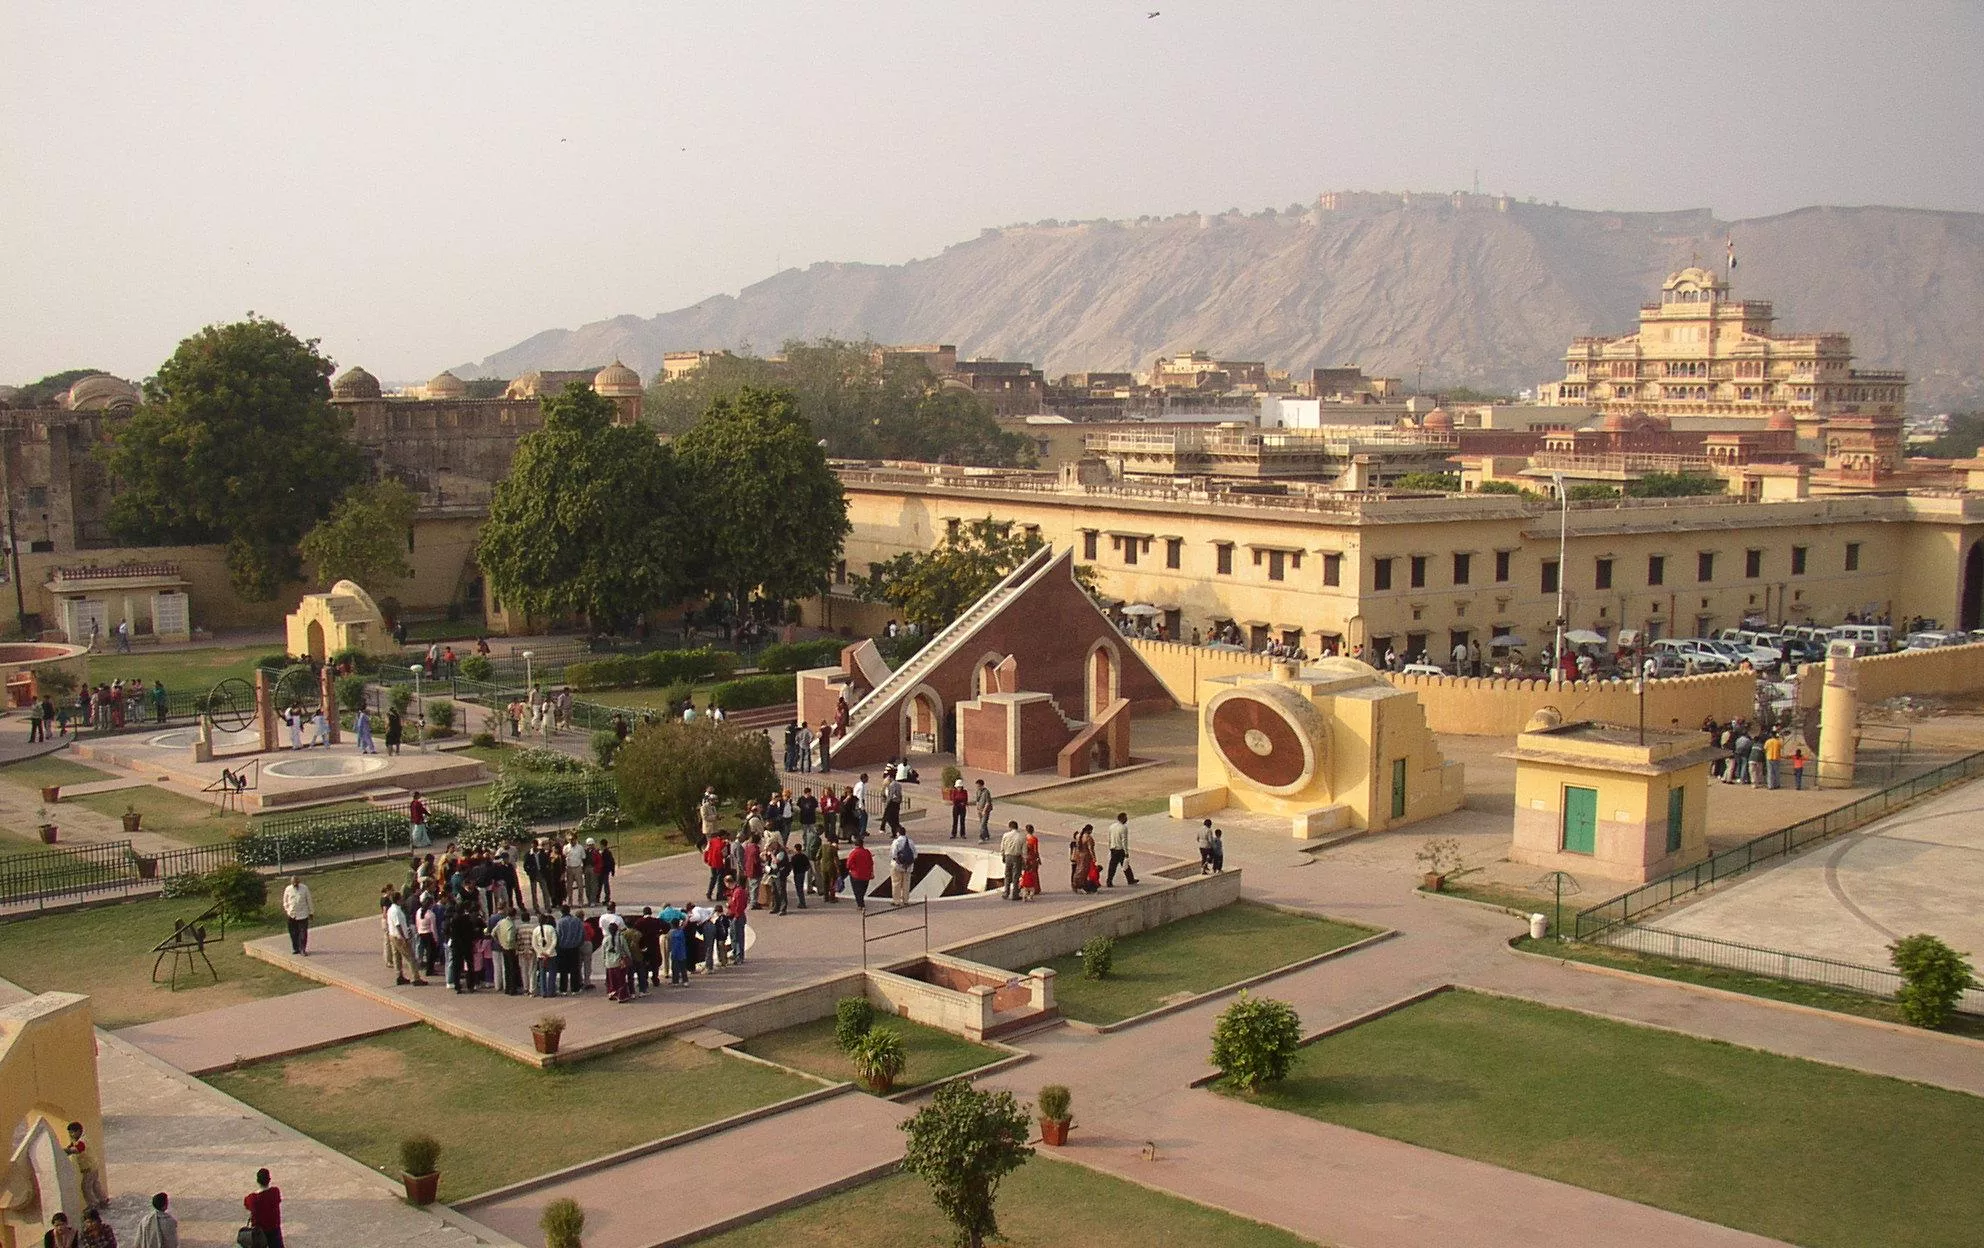 Jantar Mantar in India, Central Asia | Observatories & Planetariums - Rated 9.6